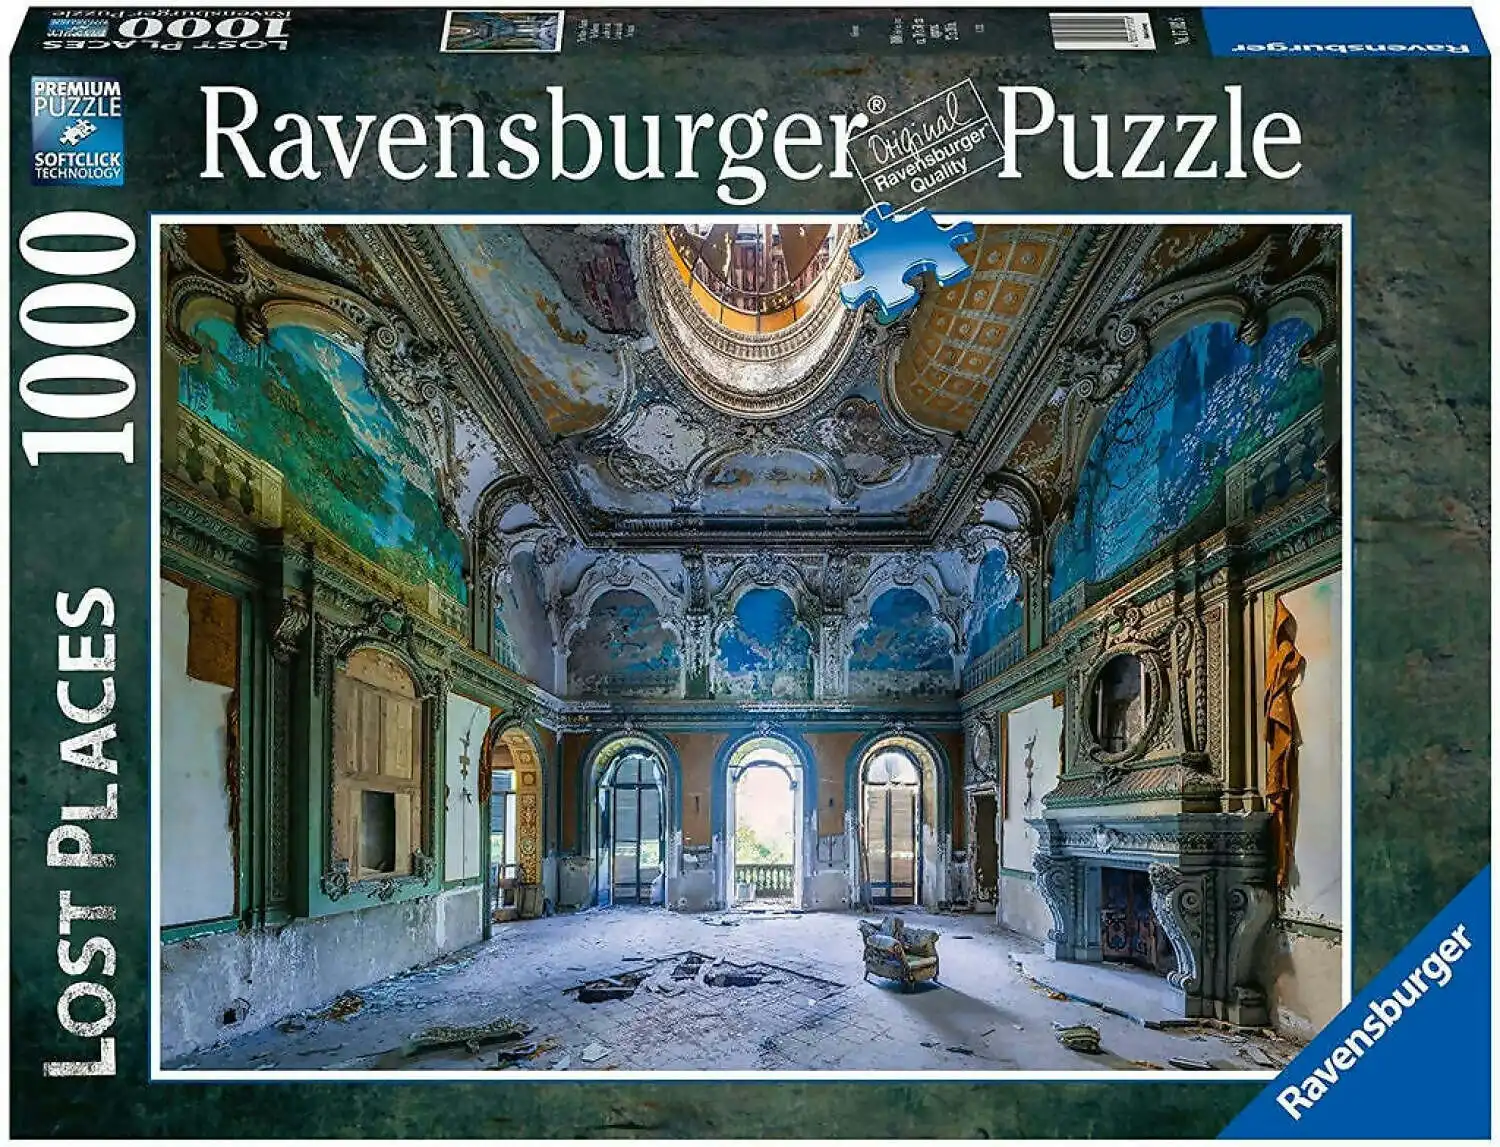 Ravensburger - The Palace Palazzo Jigsaw Puzzle 1000 Pieces